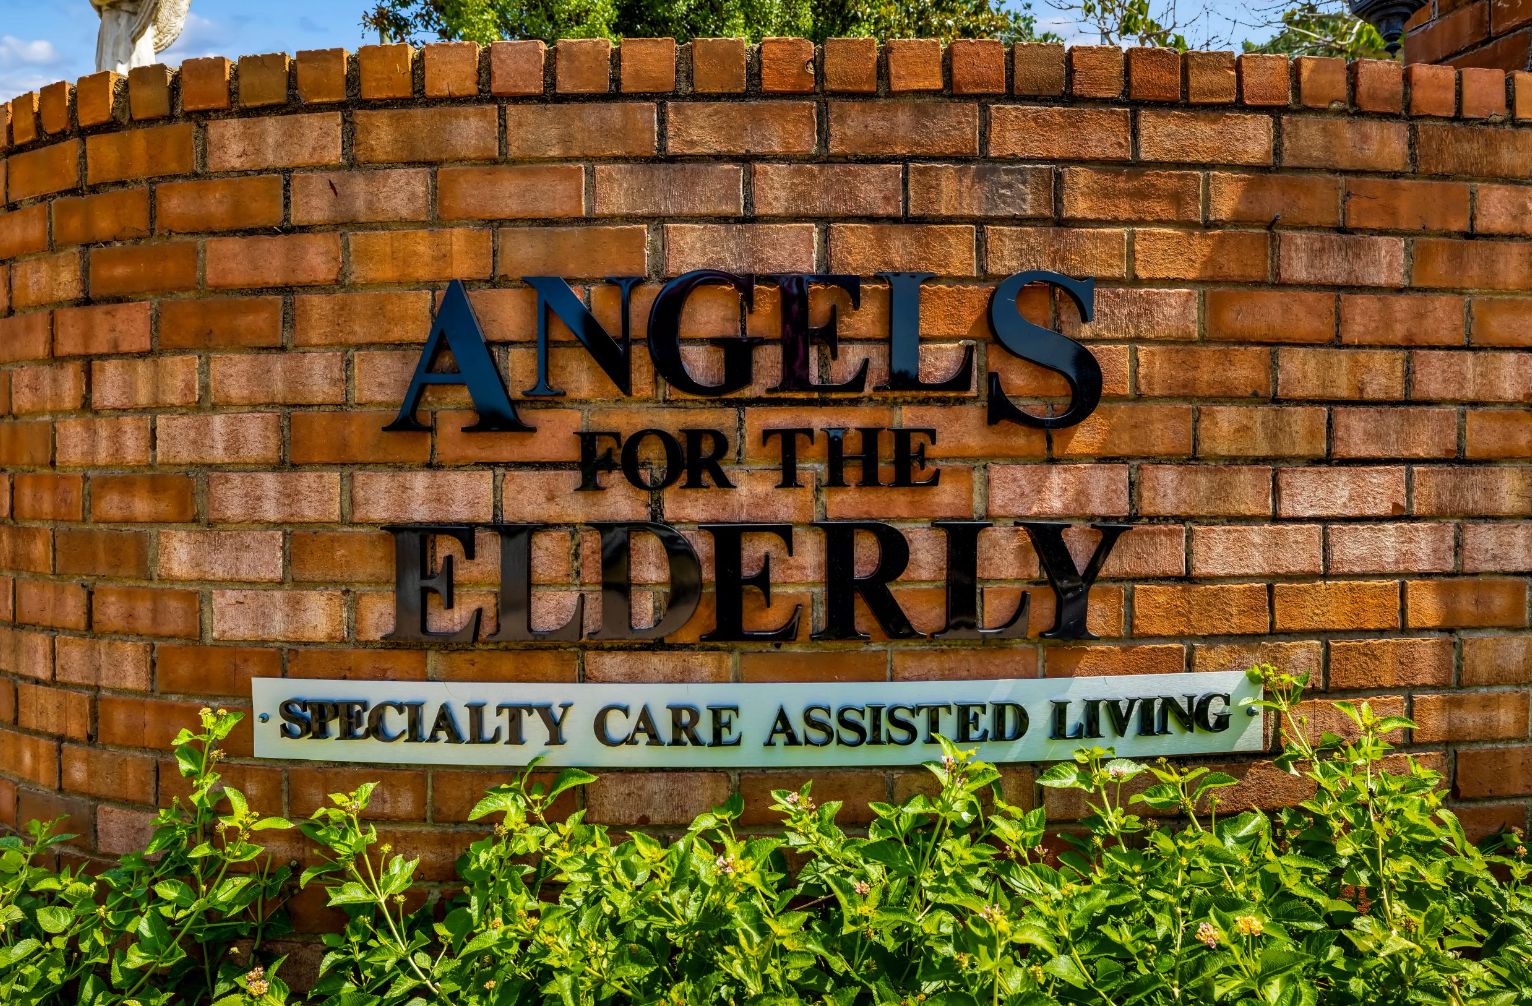 Angels for the Elderly (CLOSED), undefined, undefined 4